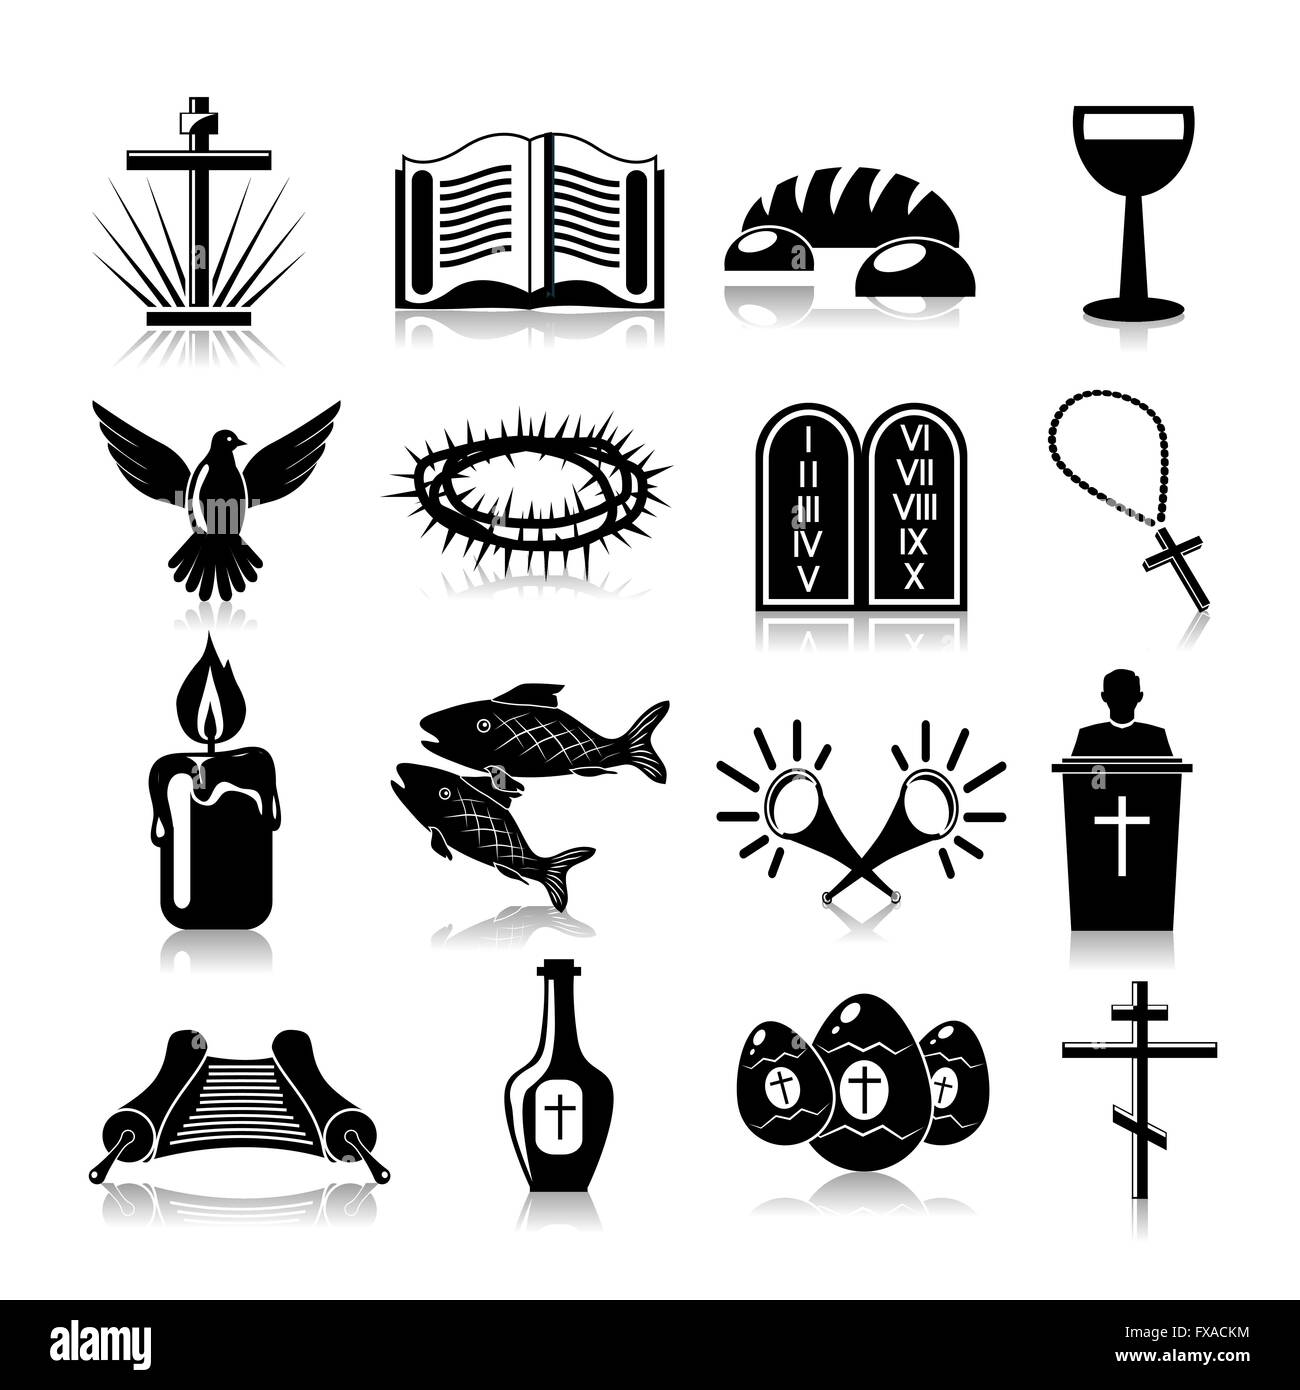 Christianity icons set black Stock Vector